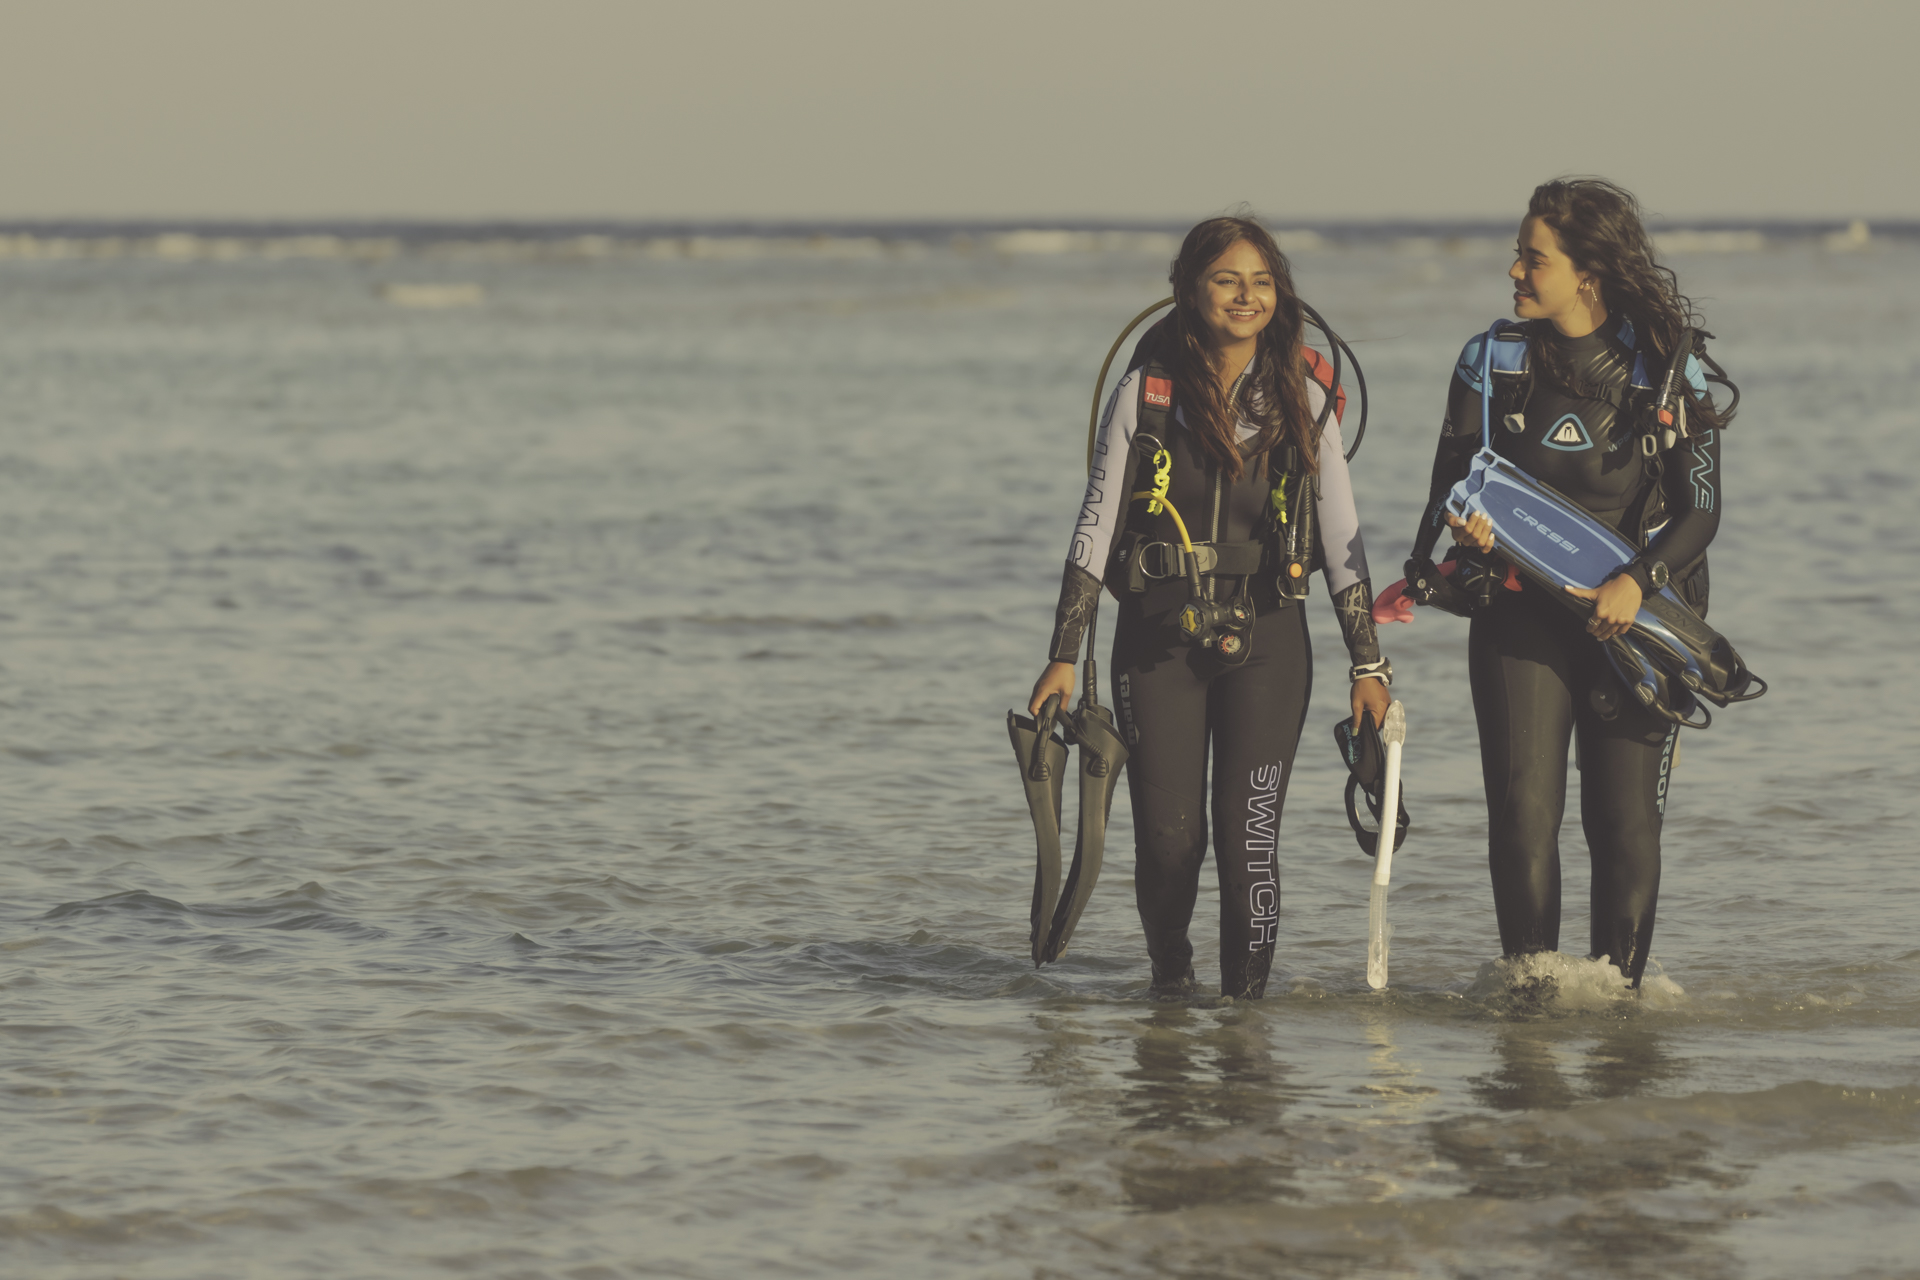 two female divers emerge from the ocean in Egypt carrying their masks and fins